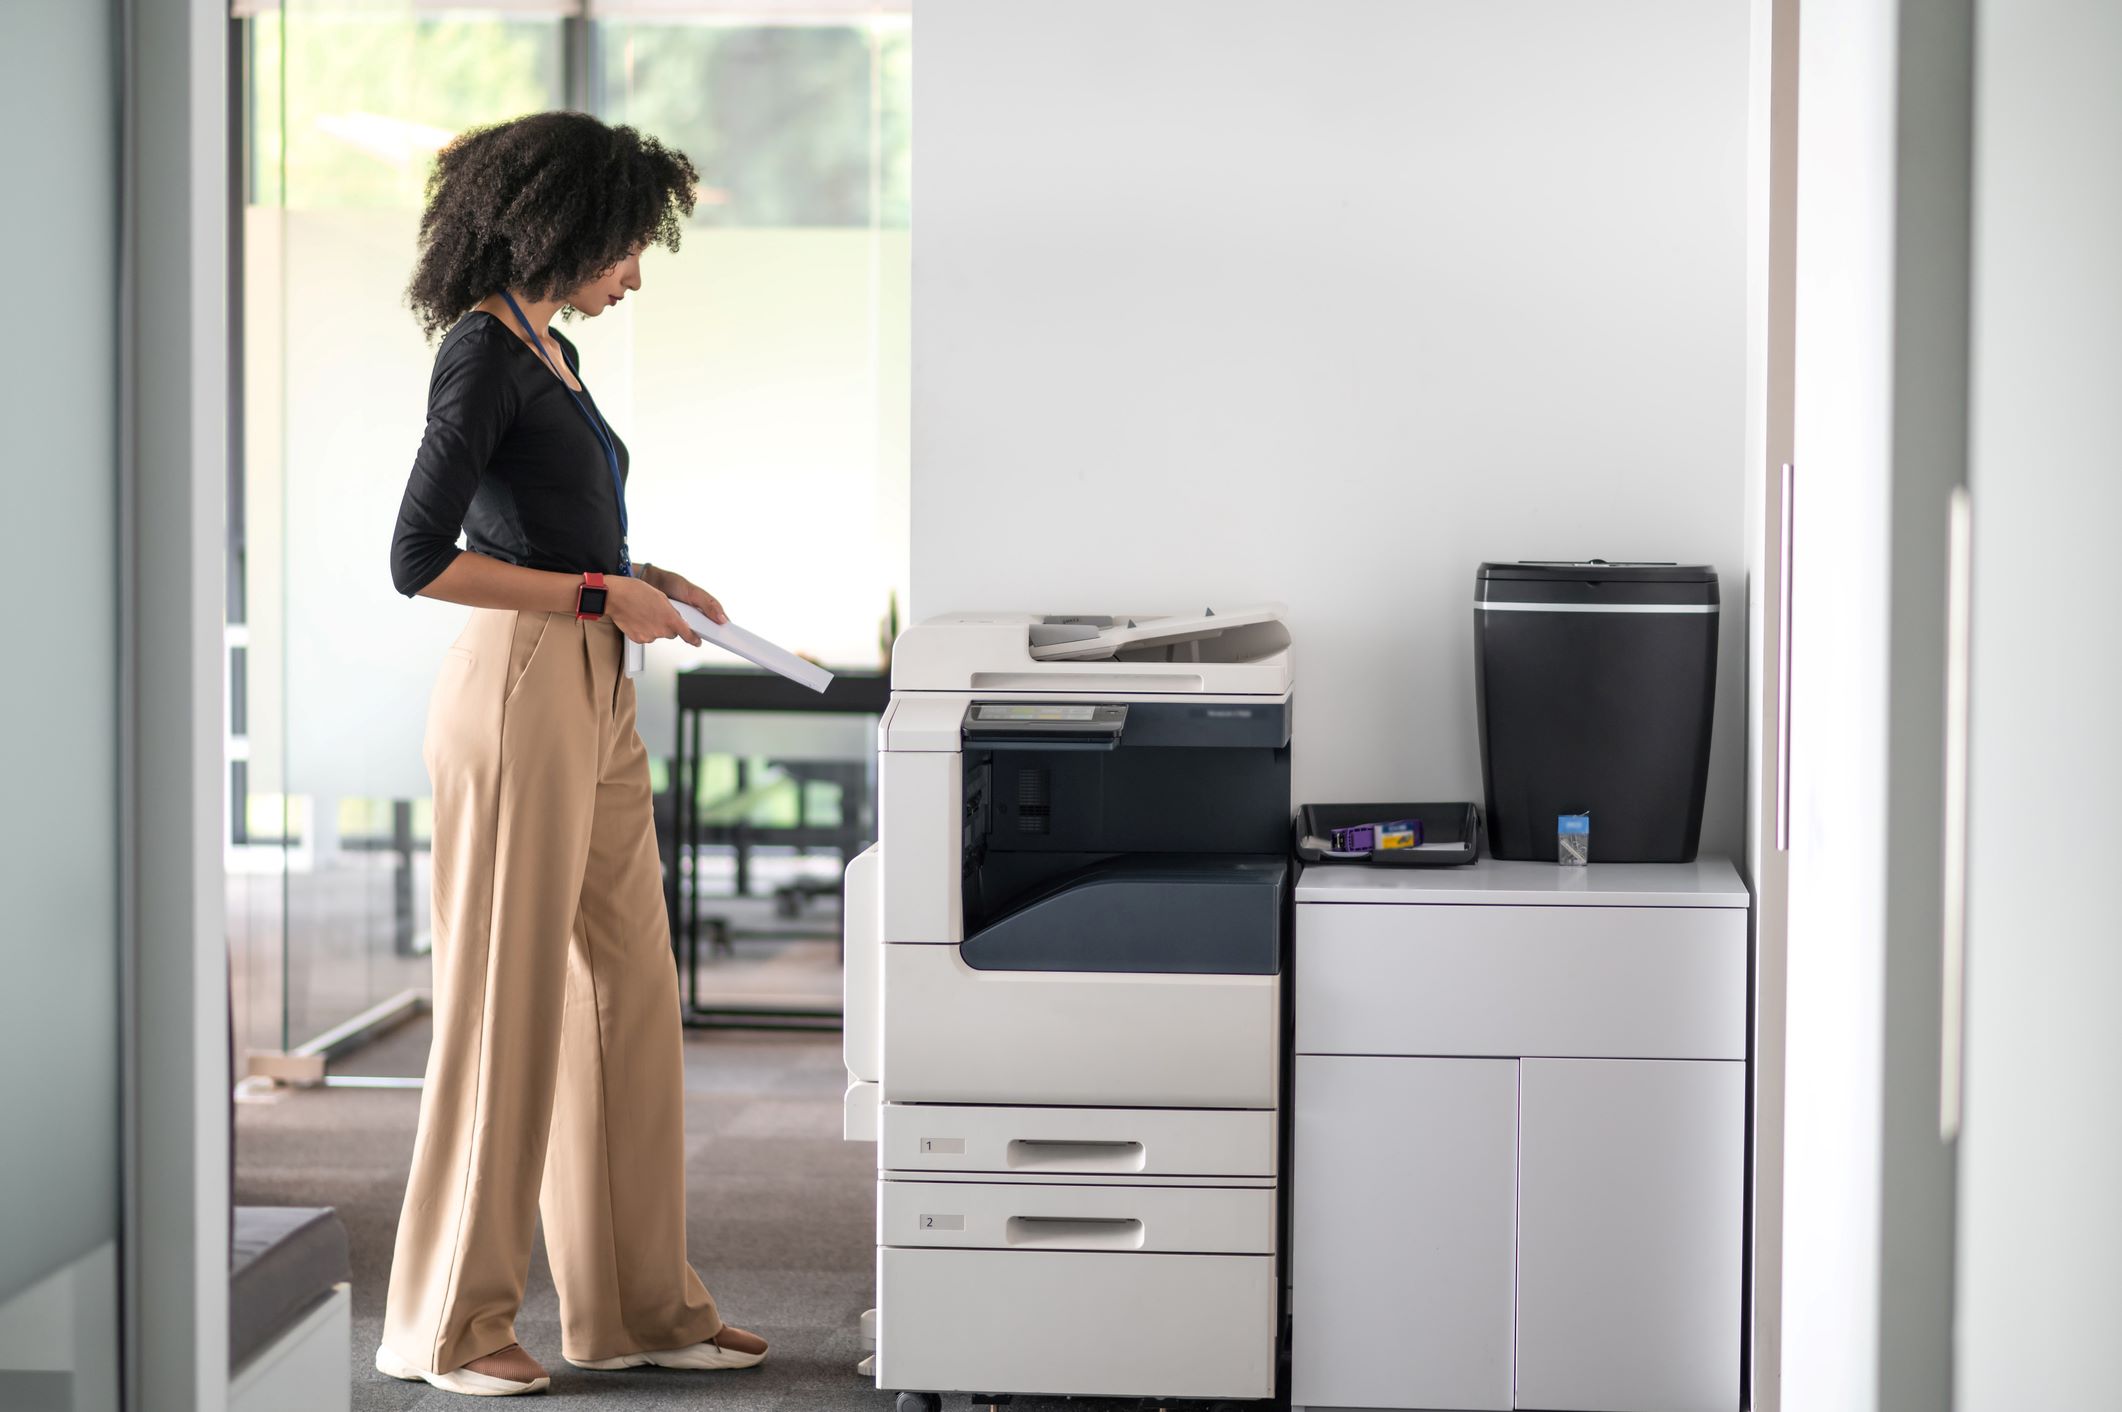 A stylish professional stands over an office printer and scanner waiting for outputs.